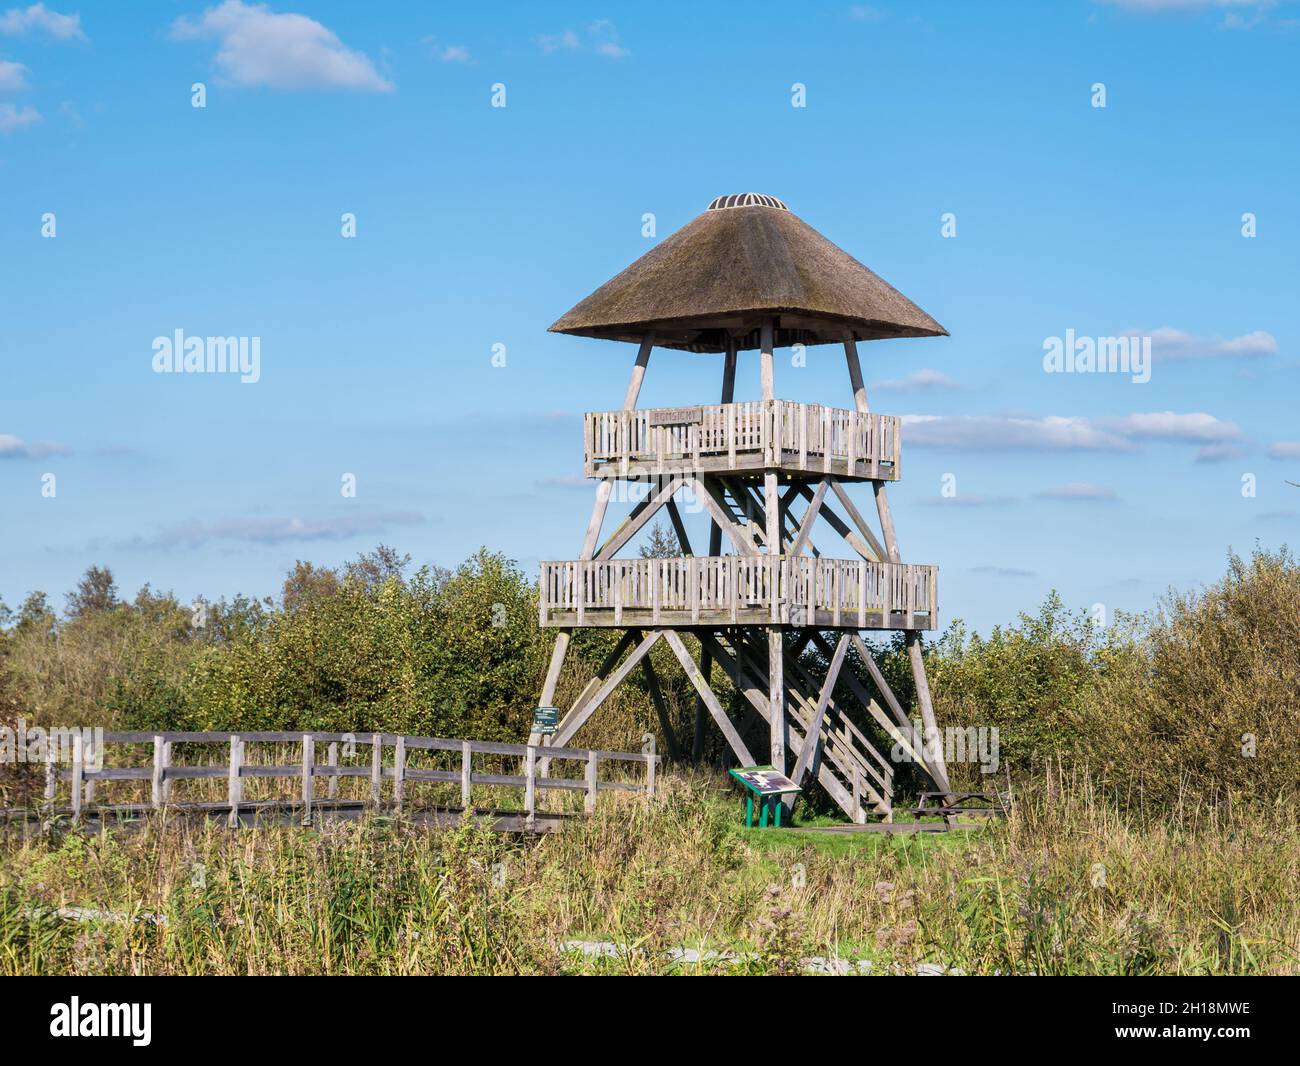 Wooden watch tower Romsicht with viewing platform in nature reserve national park Alde Feanen in Friesland, Netherlands Stock Photo